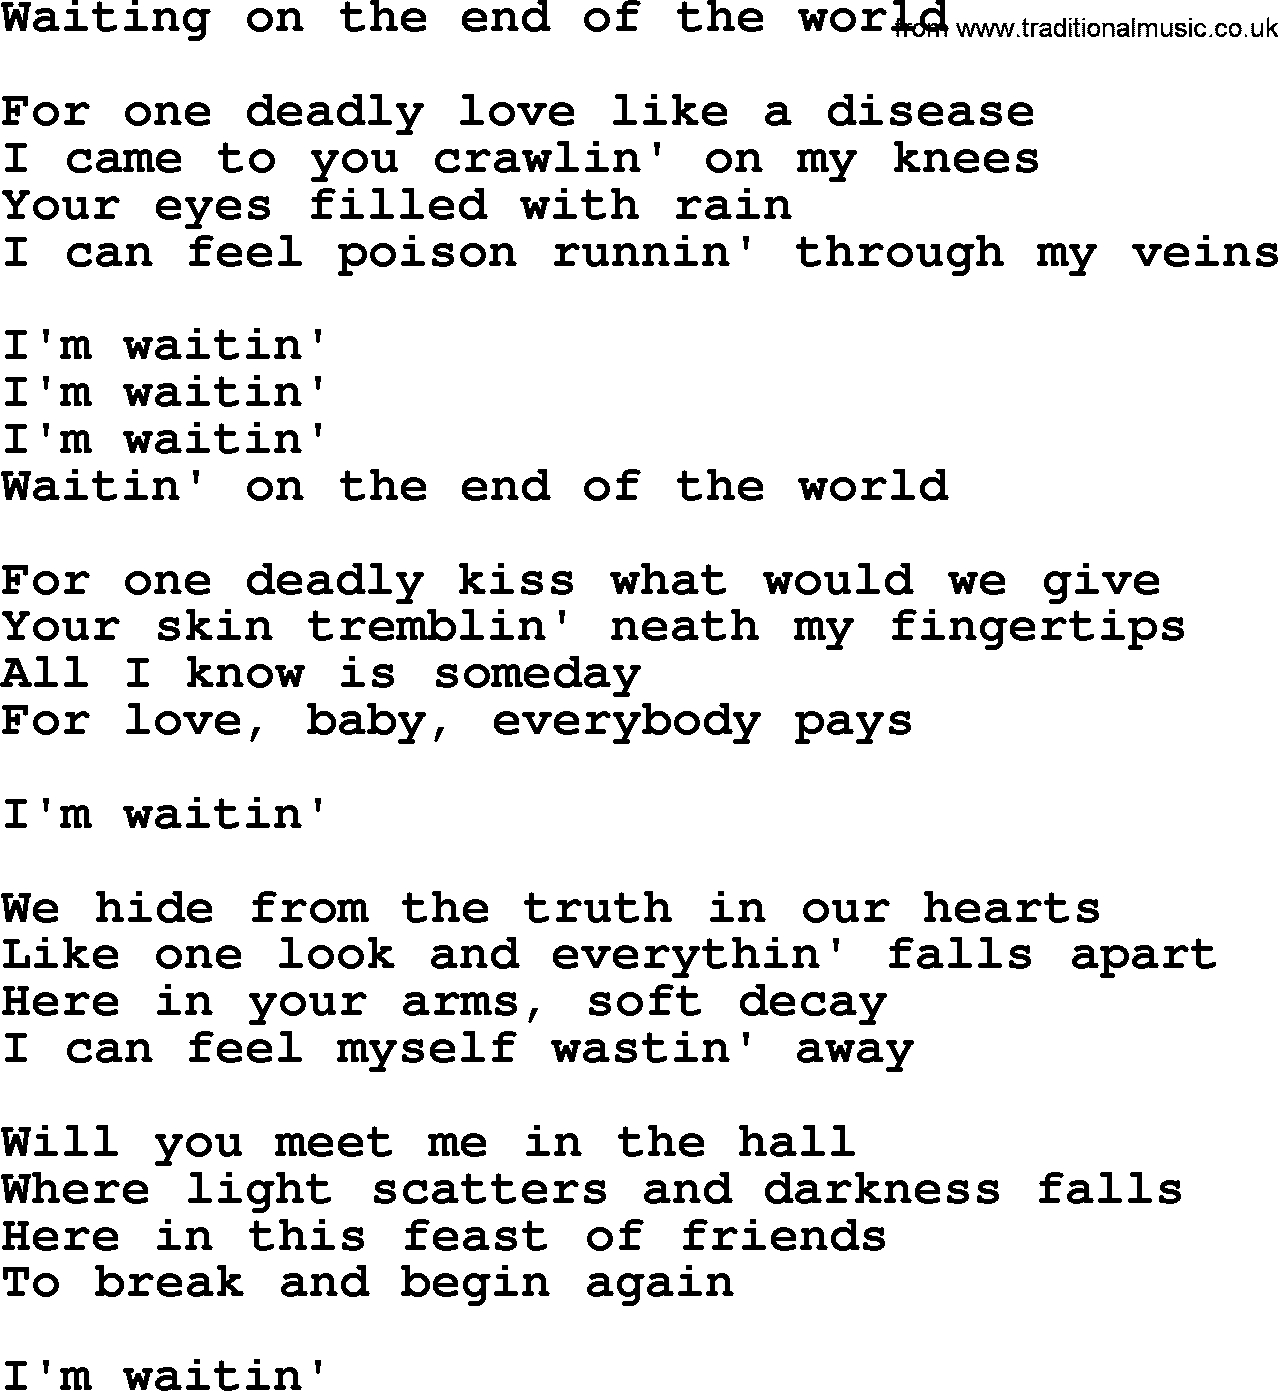 Bruce Springsteen song: Waiting On The End Of The World lyrics